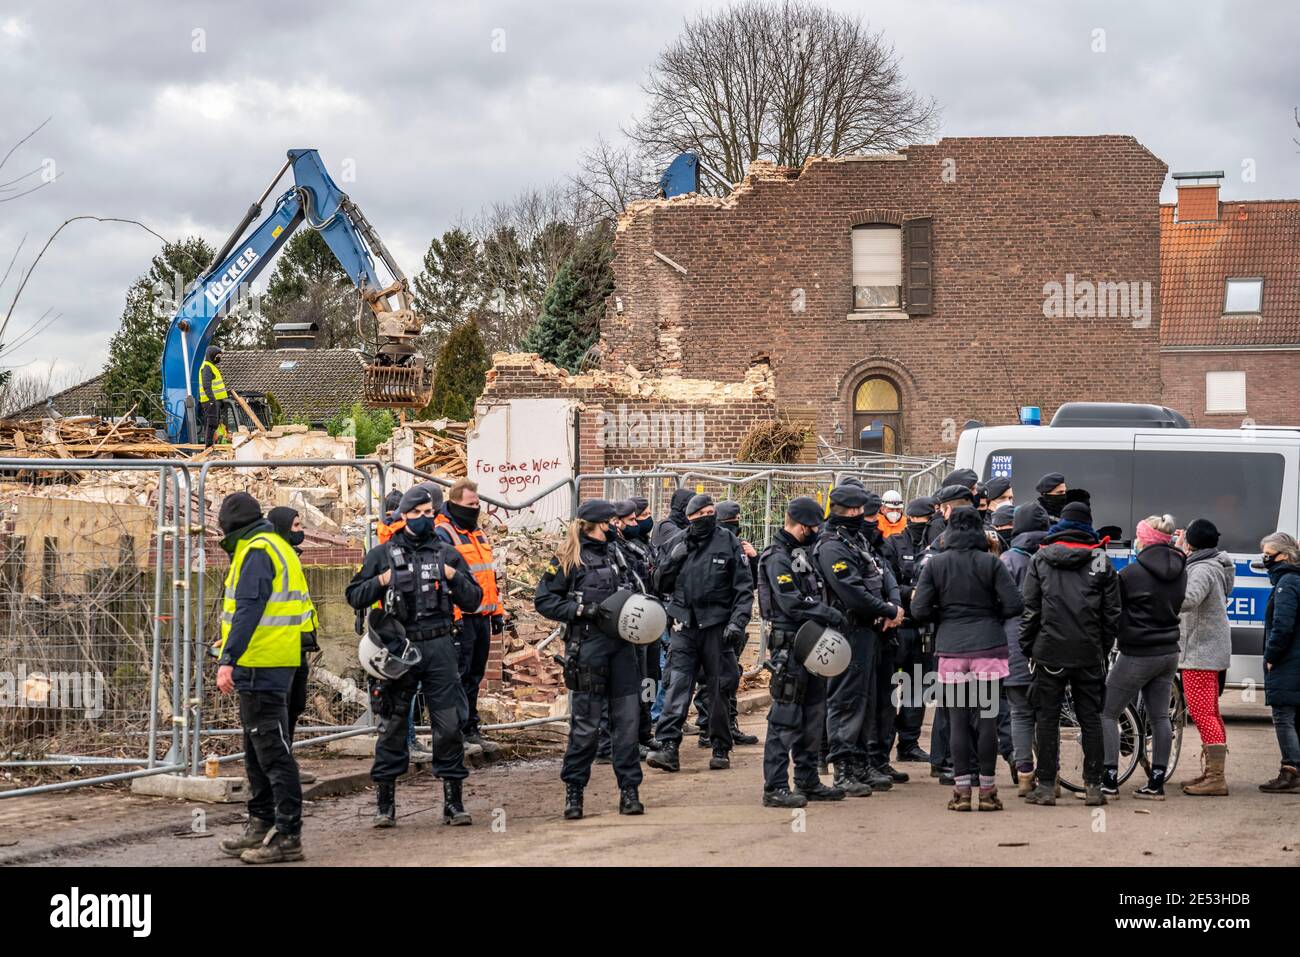 Demolition of the village of Lützerath near Erkelenz by the energy company RWE to make way for the open-cast lignite mine Garzweiler II, protests by r Stock Photo